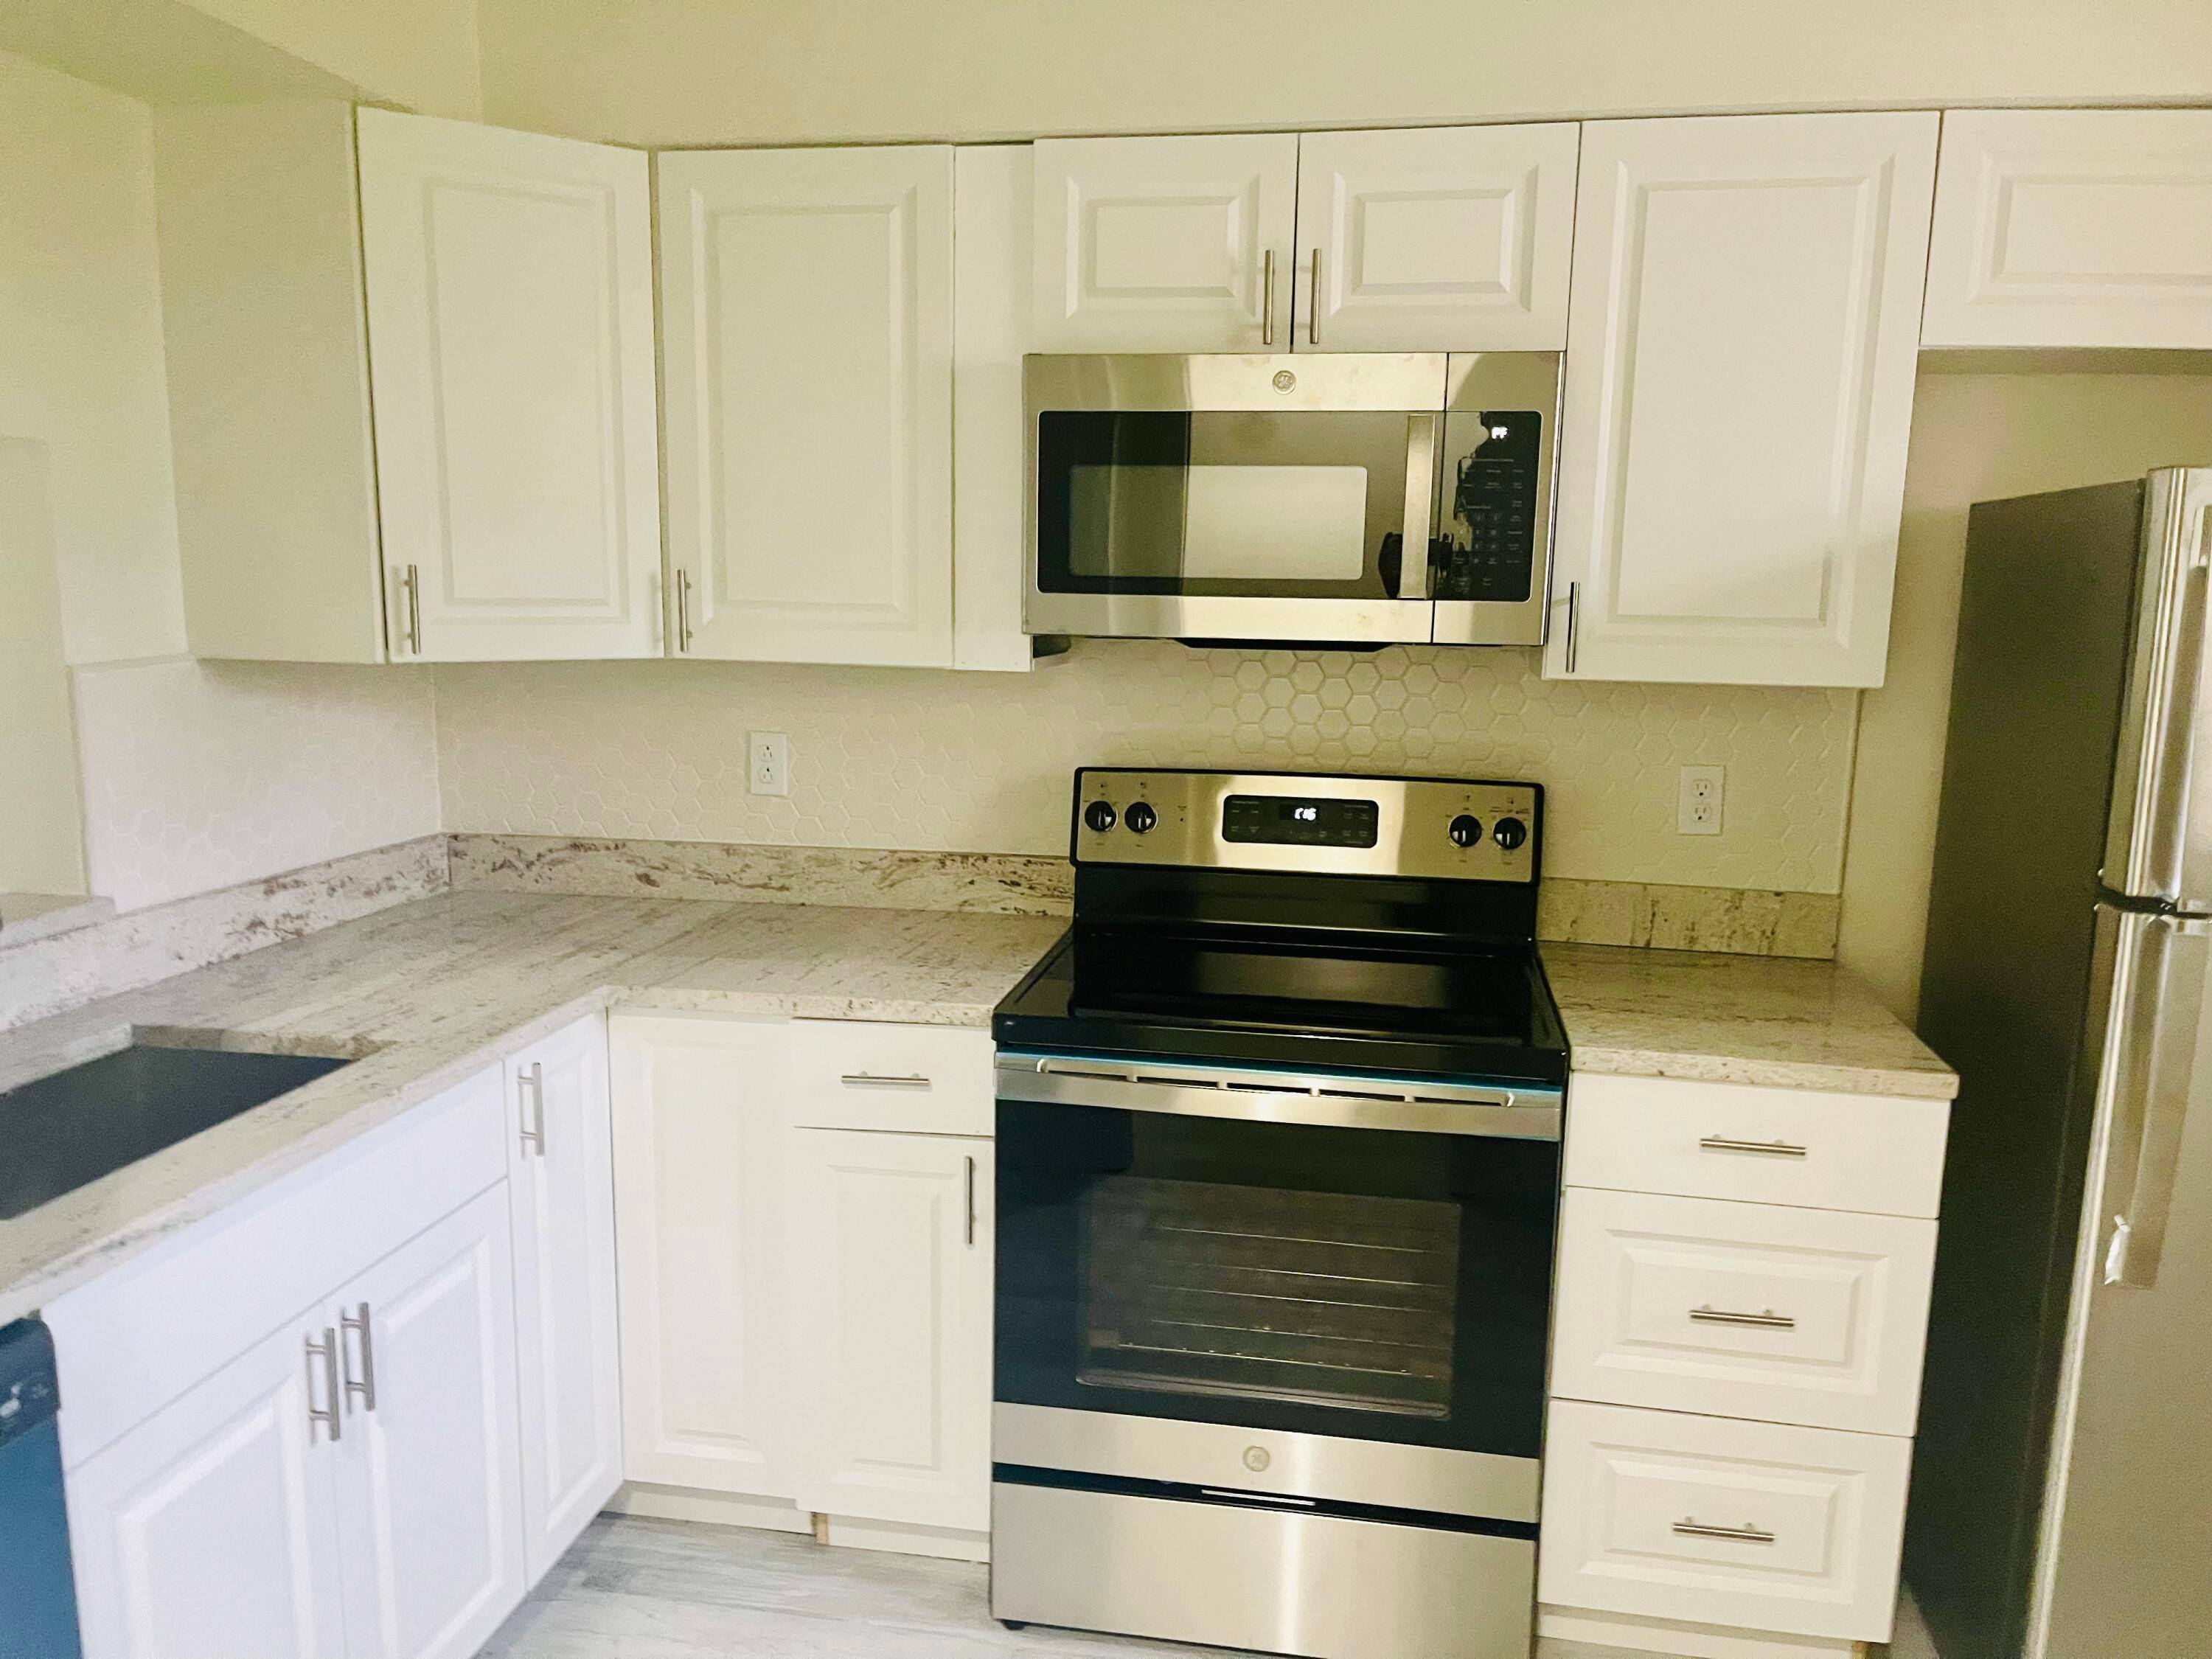 Newly renovated 2 bed 1. 5 bath condo with a pool in a gated community.